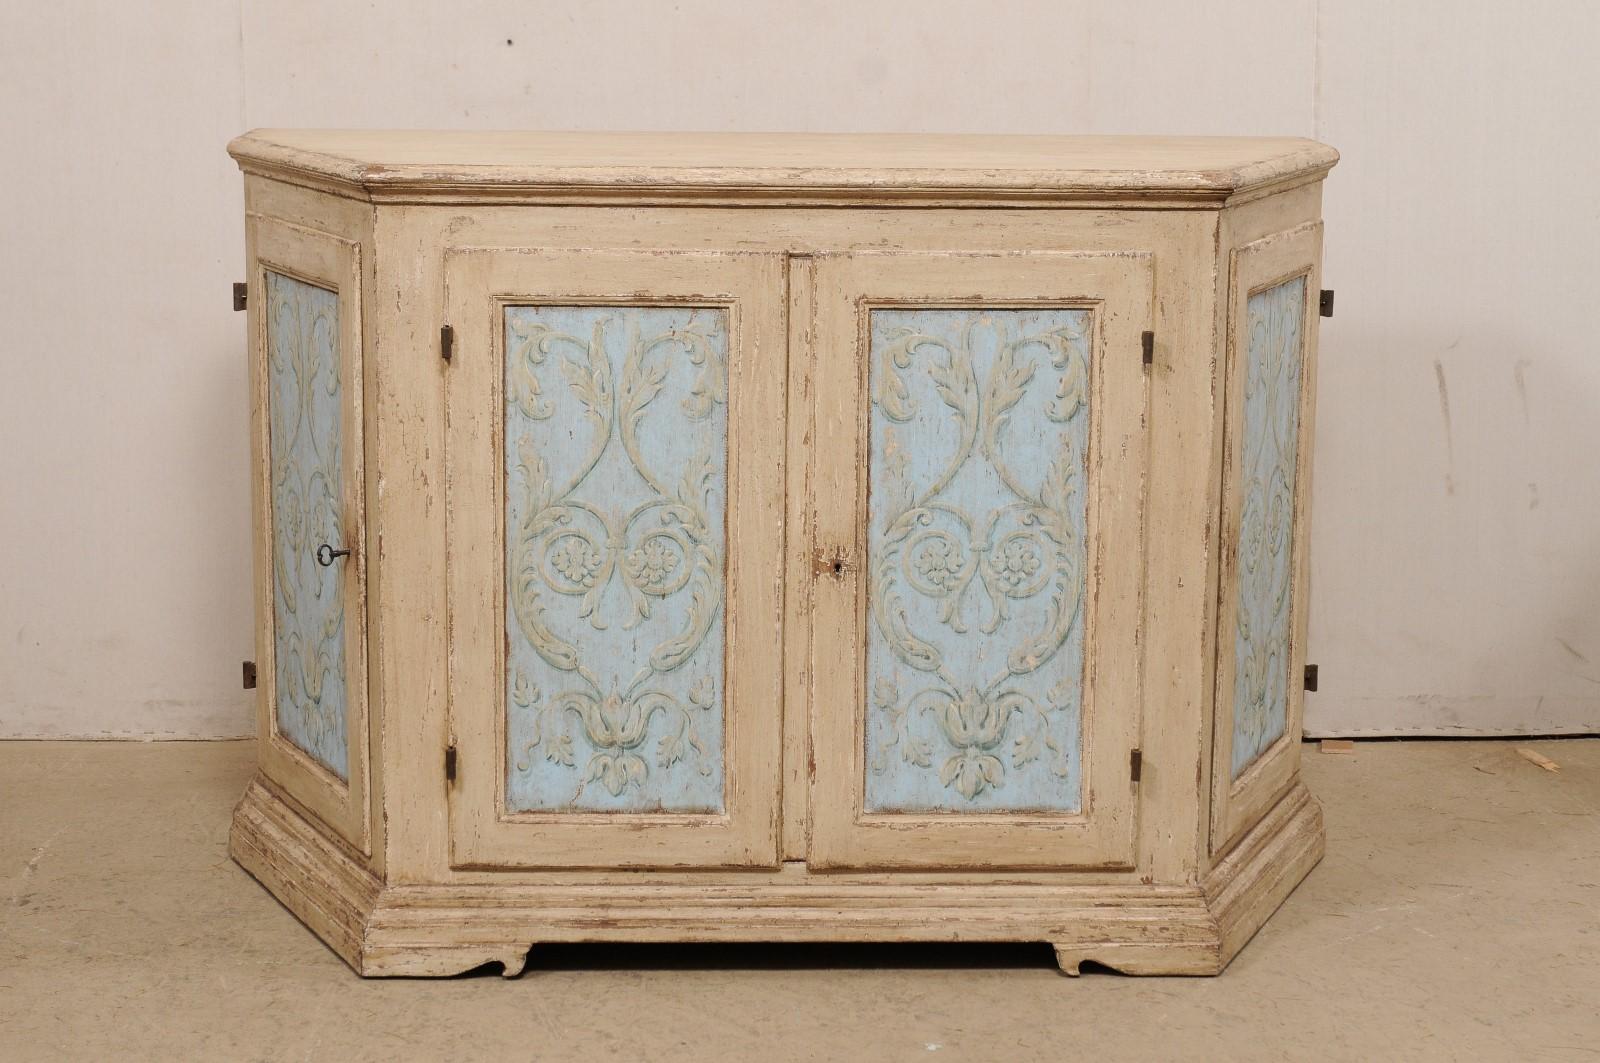 A vintage Italian large sized hand-painted wooden buffet cabinet. This Italian console cabinet is fitted with four doors, two at the shorter front side, flanked by a pair at the nicely canted sides. Each door is recess paneled, has been artistically